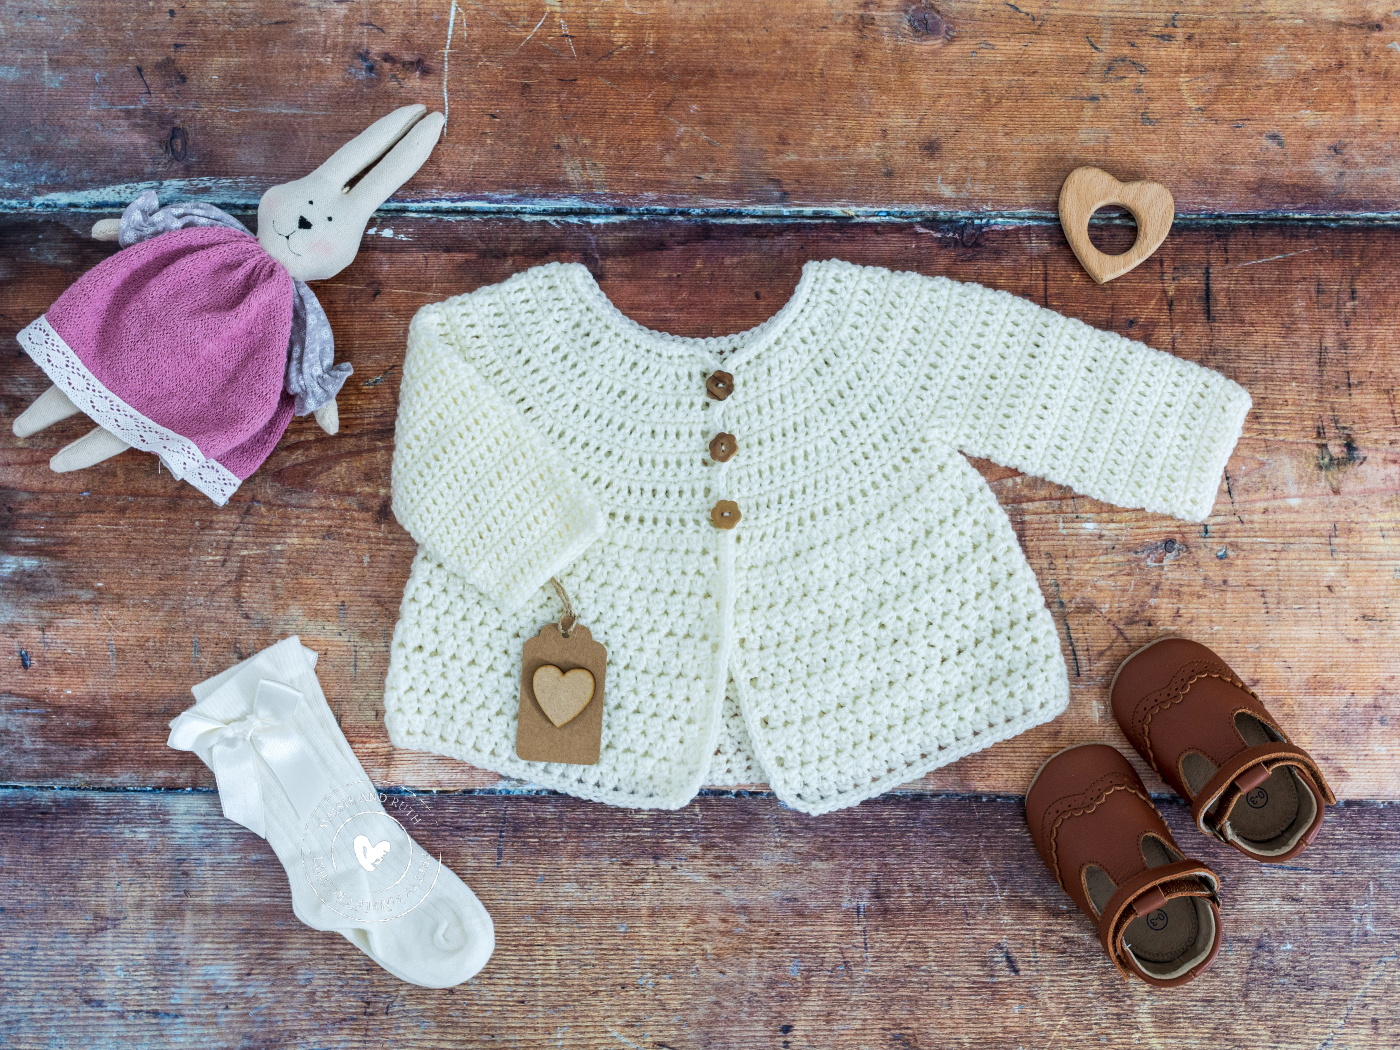 Crochet Baby Cardigan Pattern with socks and bunny